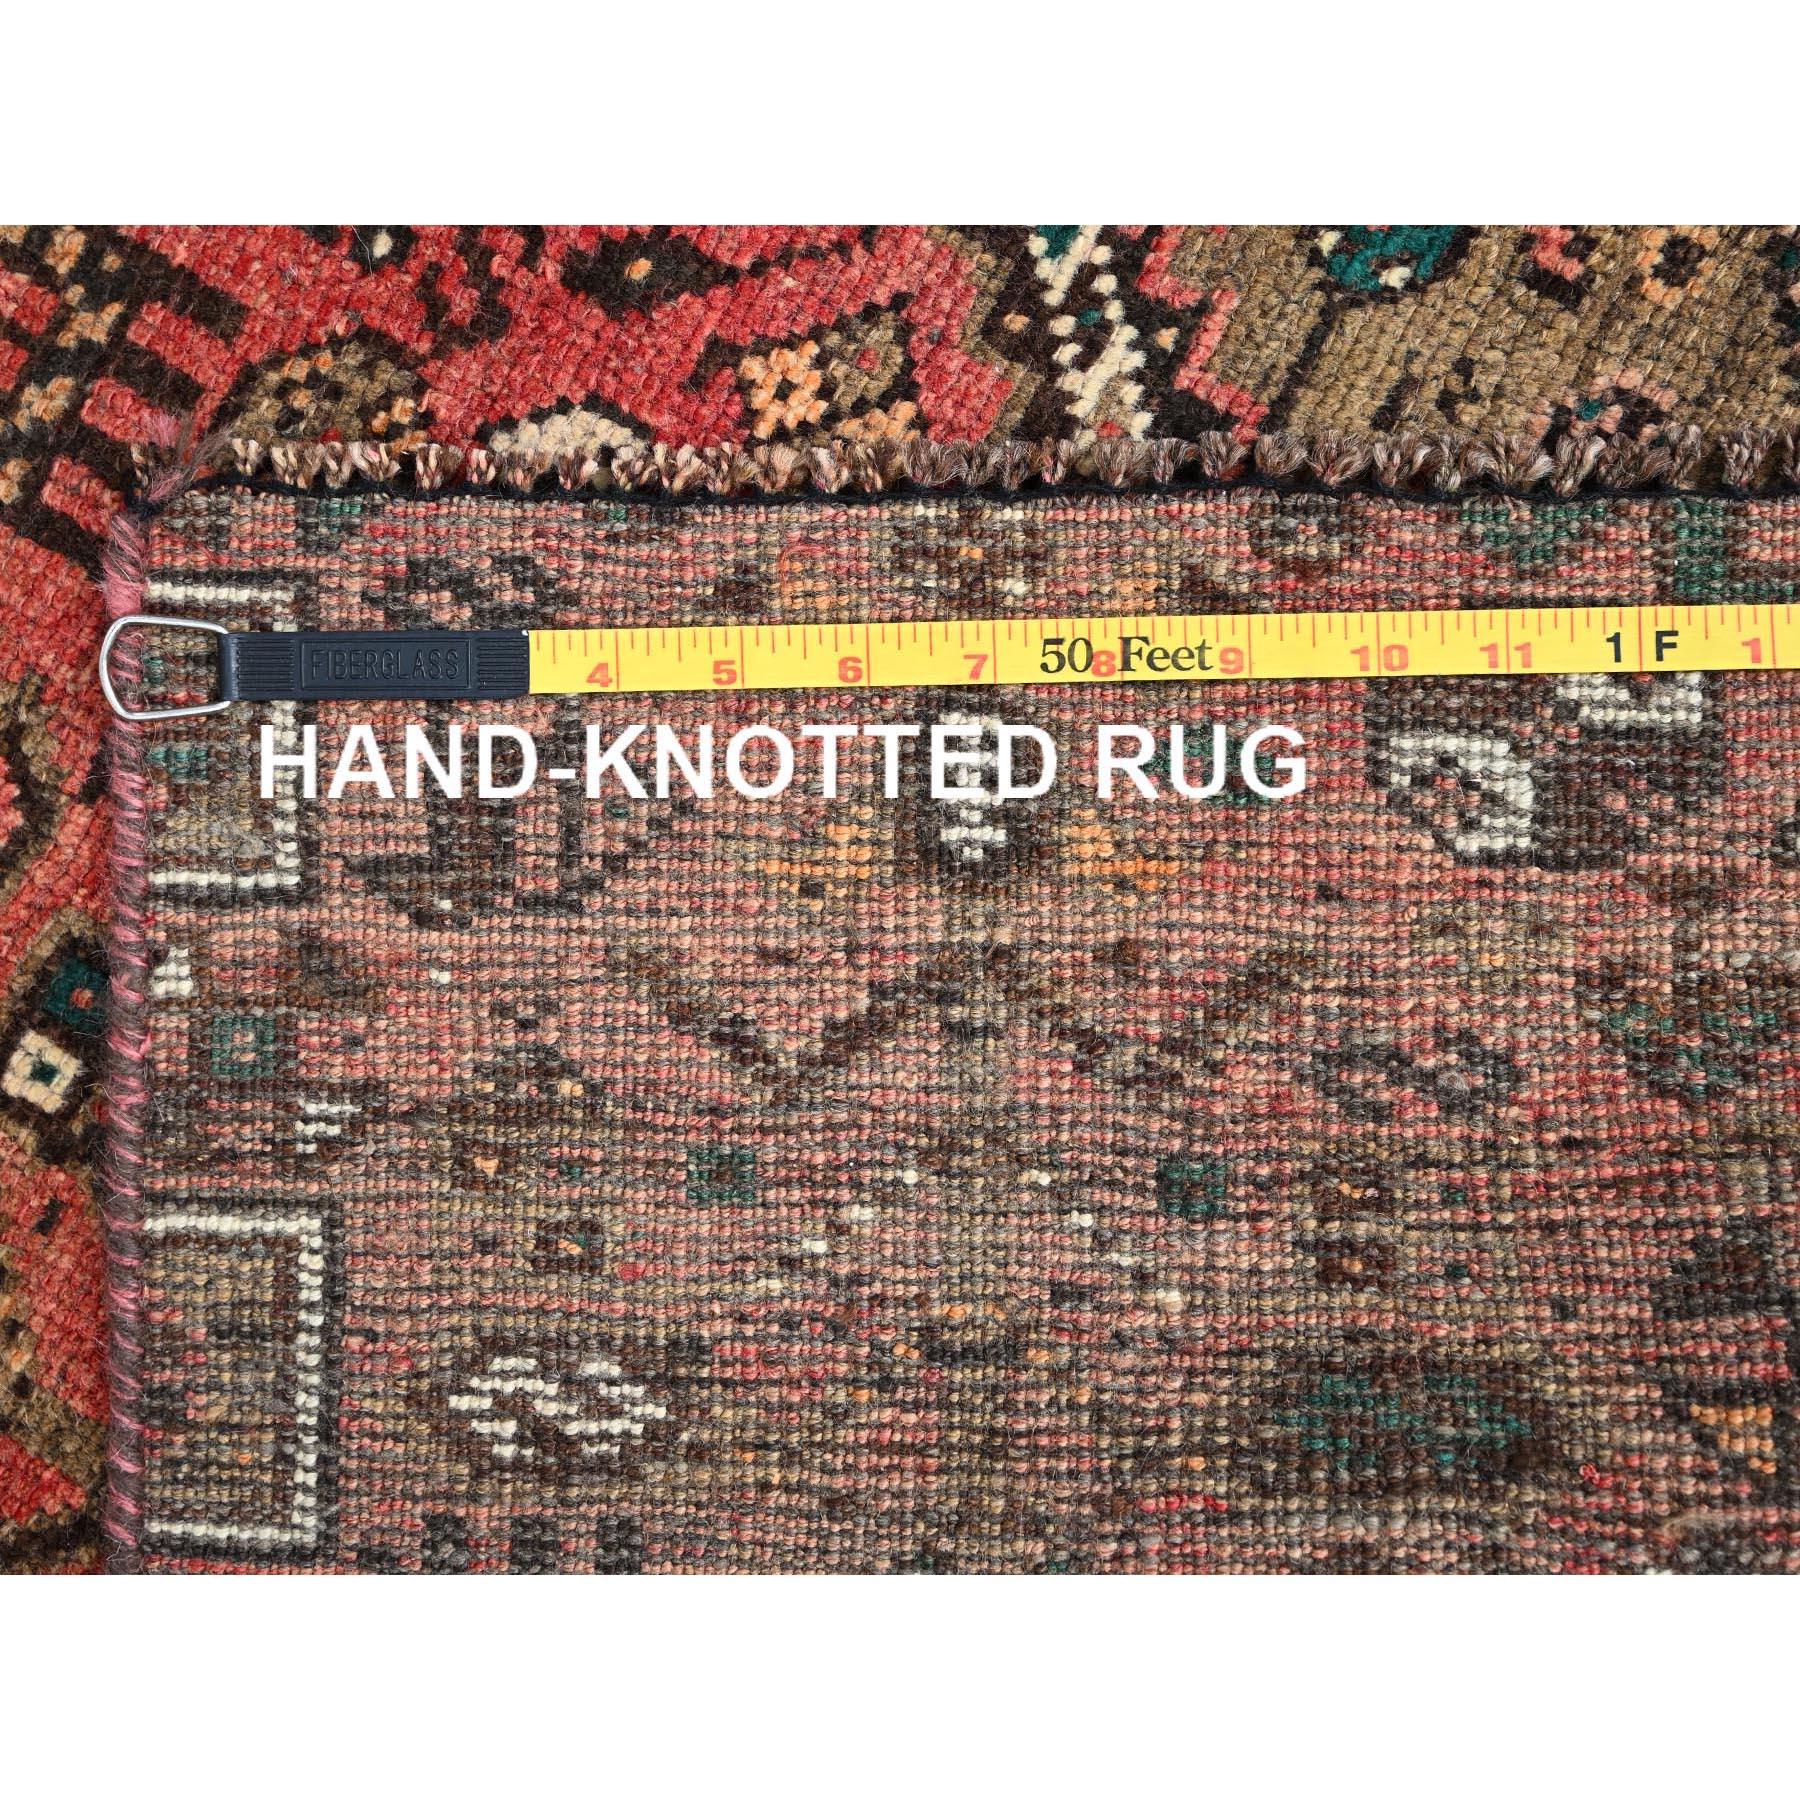 This fabulous Hand-Knotted carpet has been created and designed for extra strength and durability. This rug has been handcrafted for weeks in the traditional method that is used to make
Exact Rug Size in Feet and Inches : 4' x 6'1